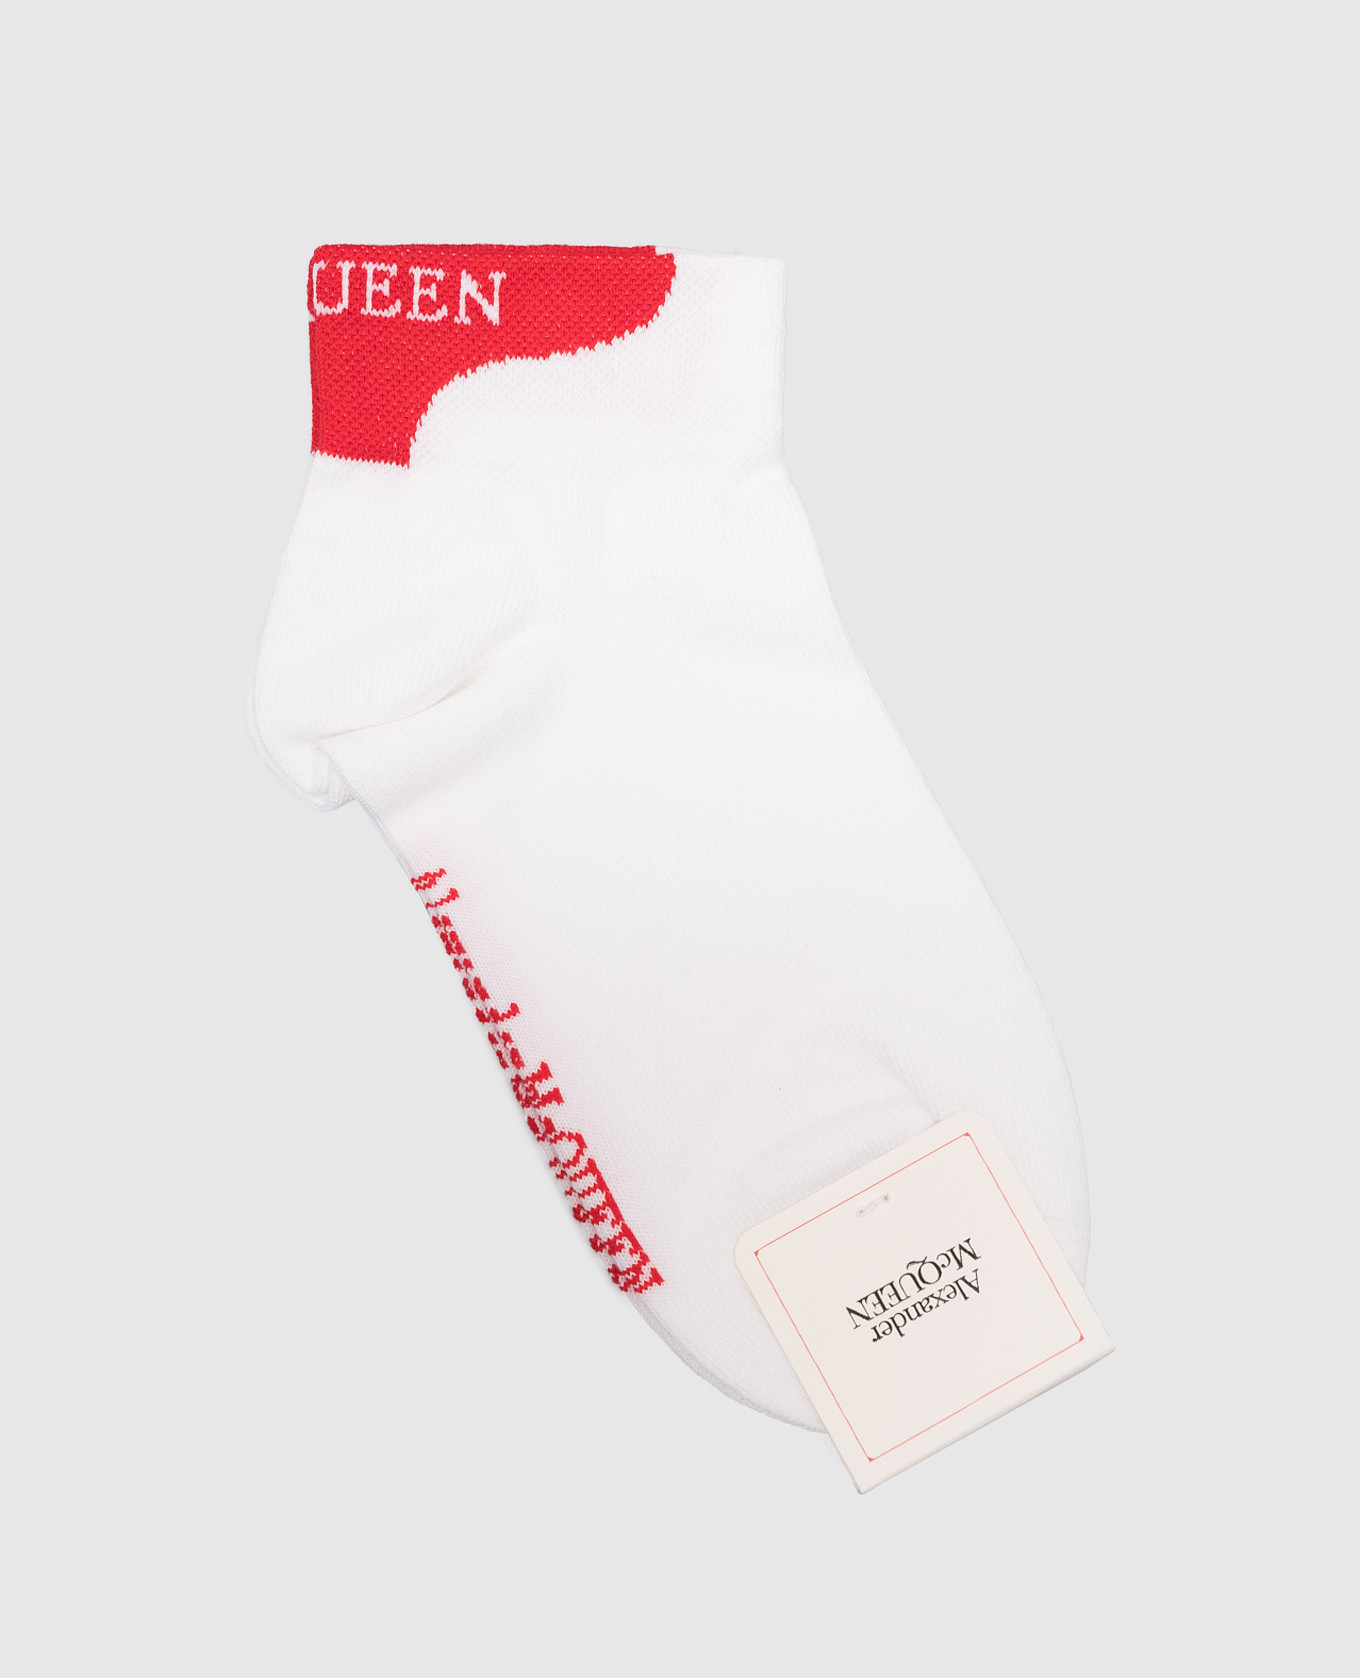 White socks with contrasting logo pattern